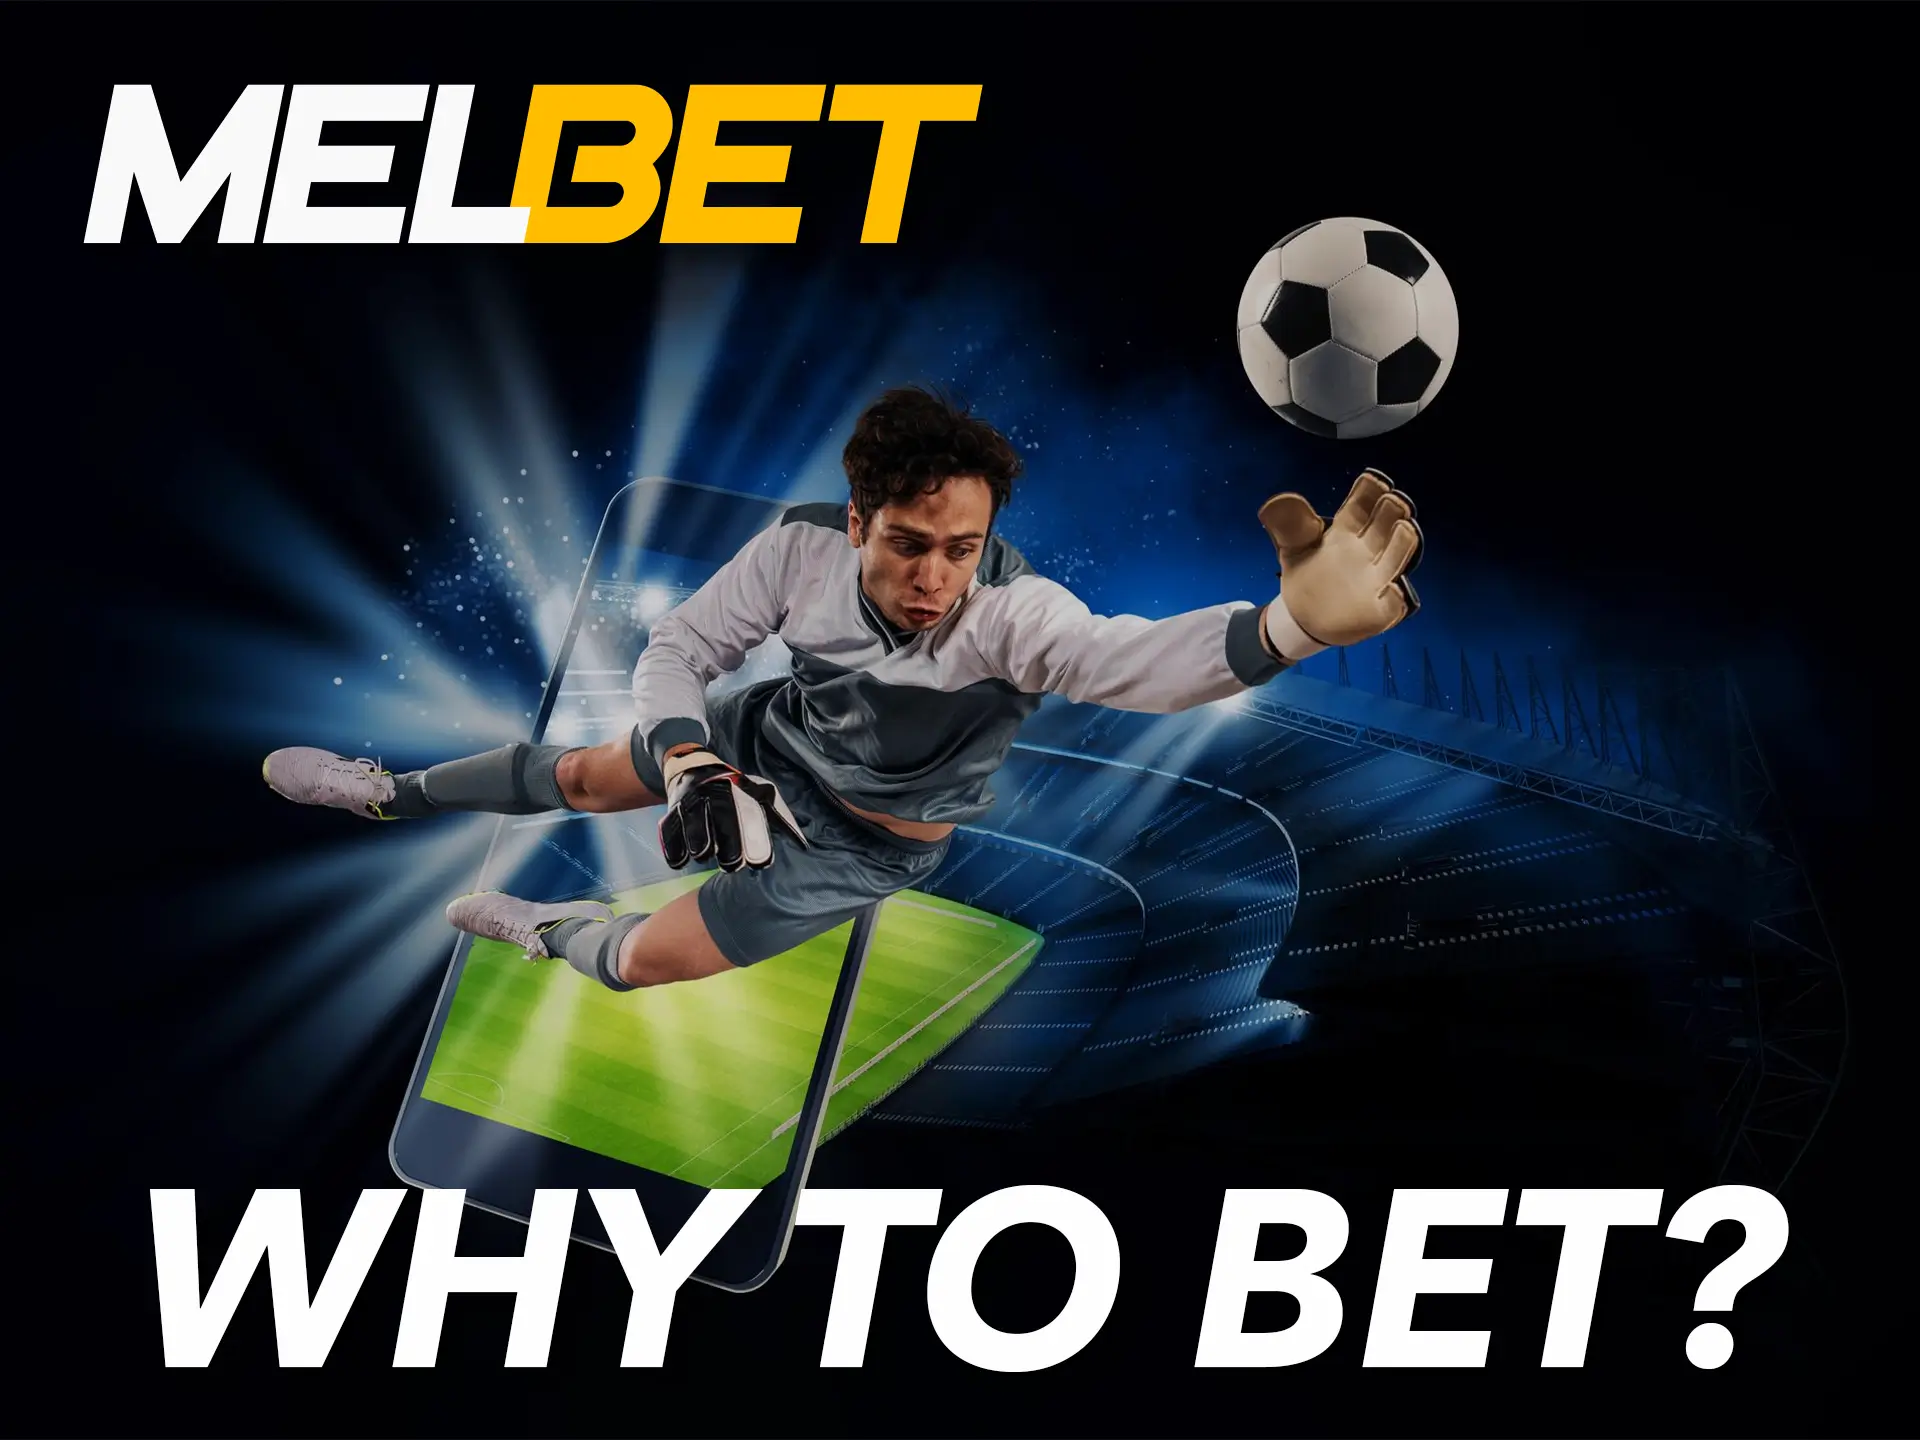 Melbet is legitimate and one of the best online casinos in India.